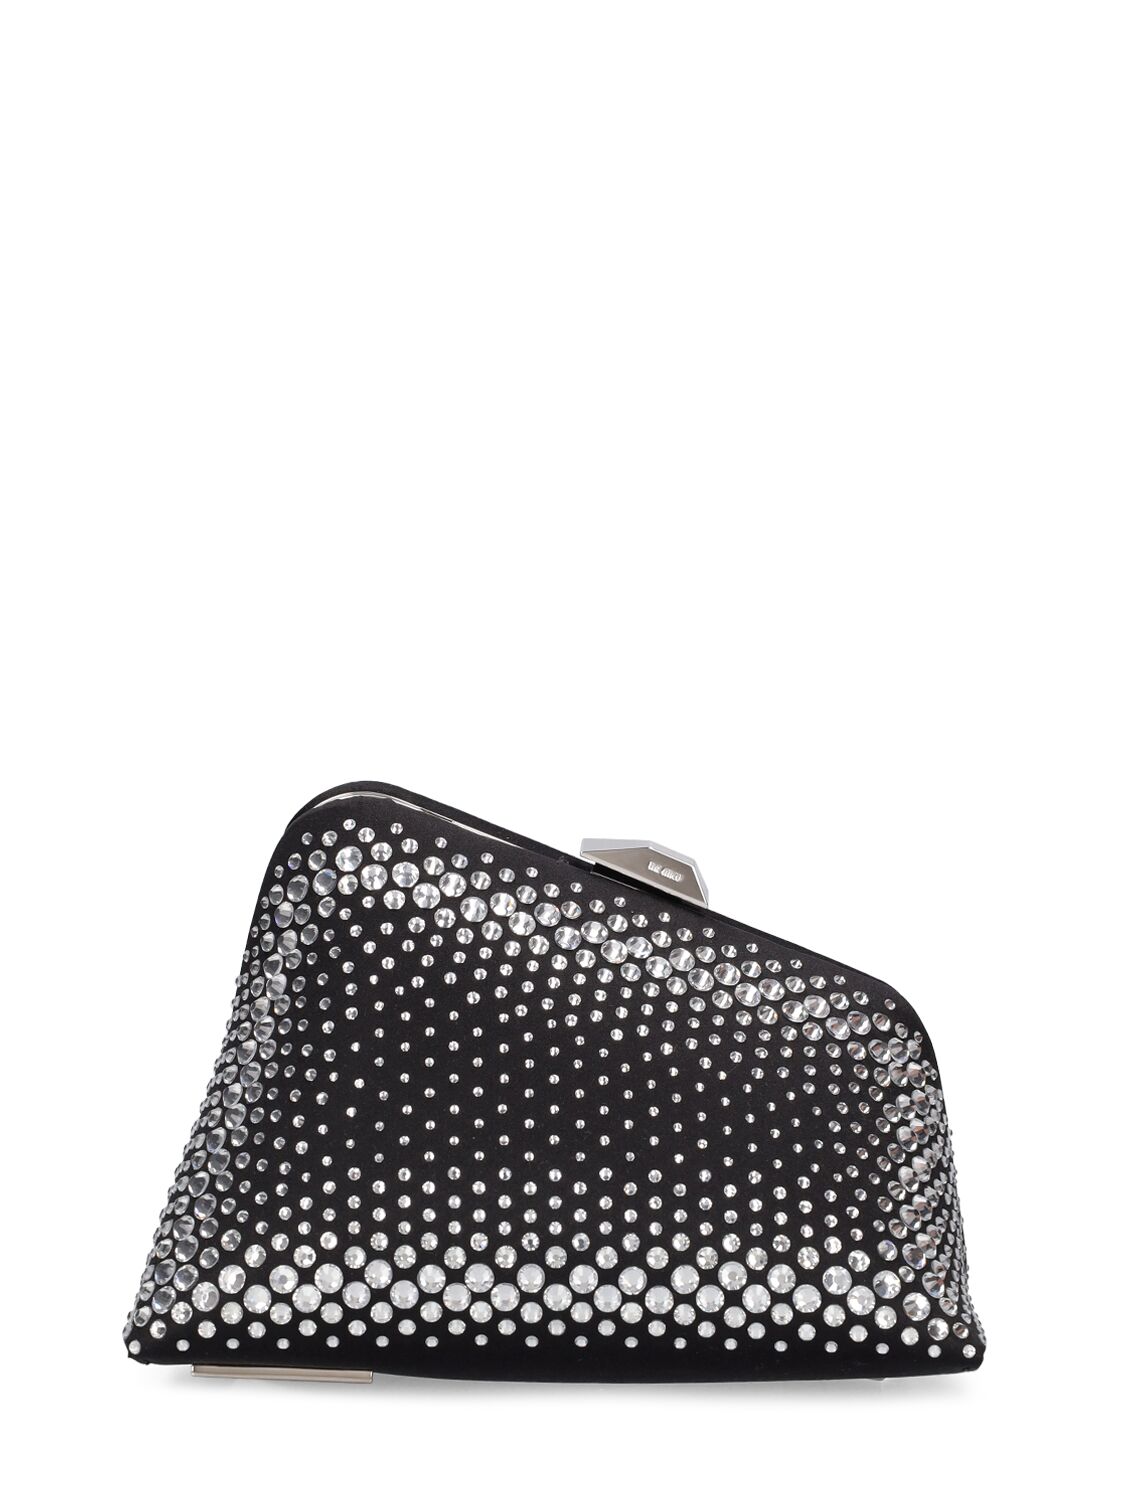 Image of Midnight Crystal Clutch